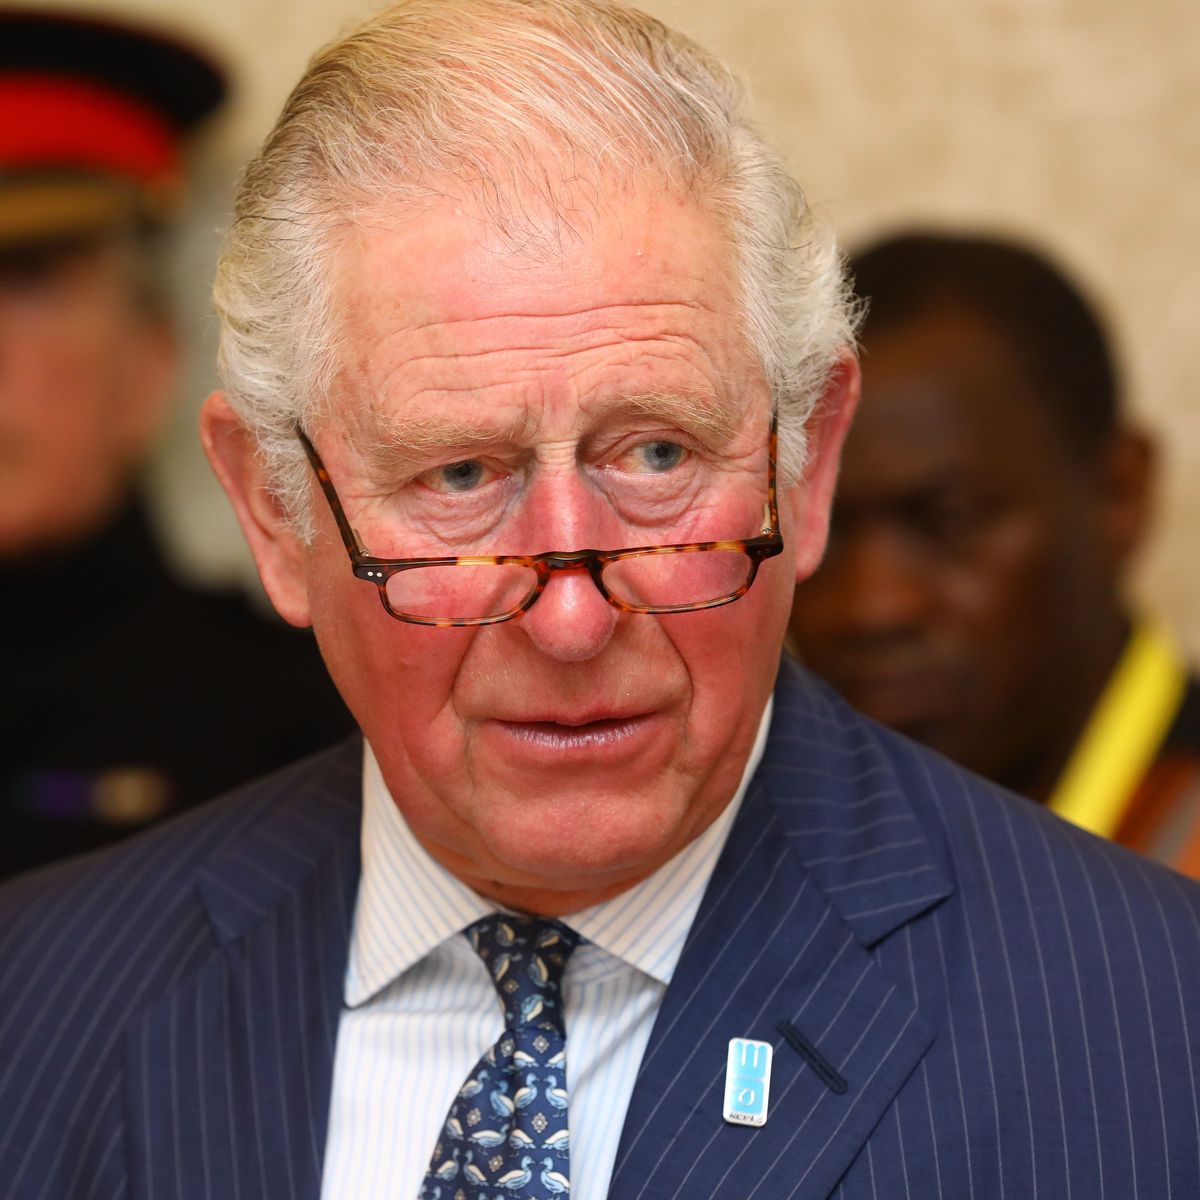 The Prince Of Wales Attends WaterAid's Water And Climate Event